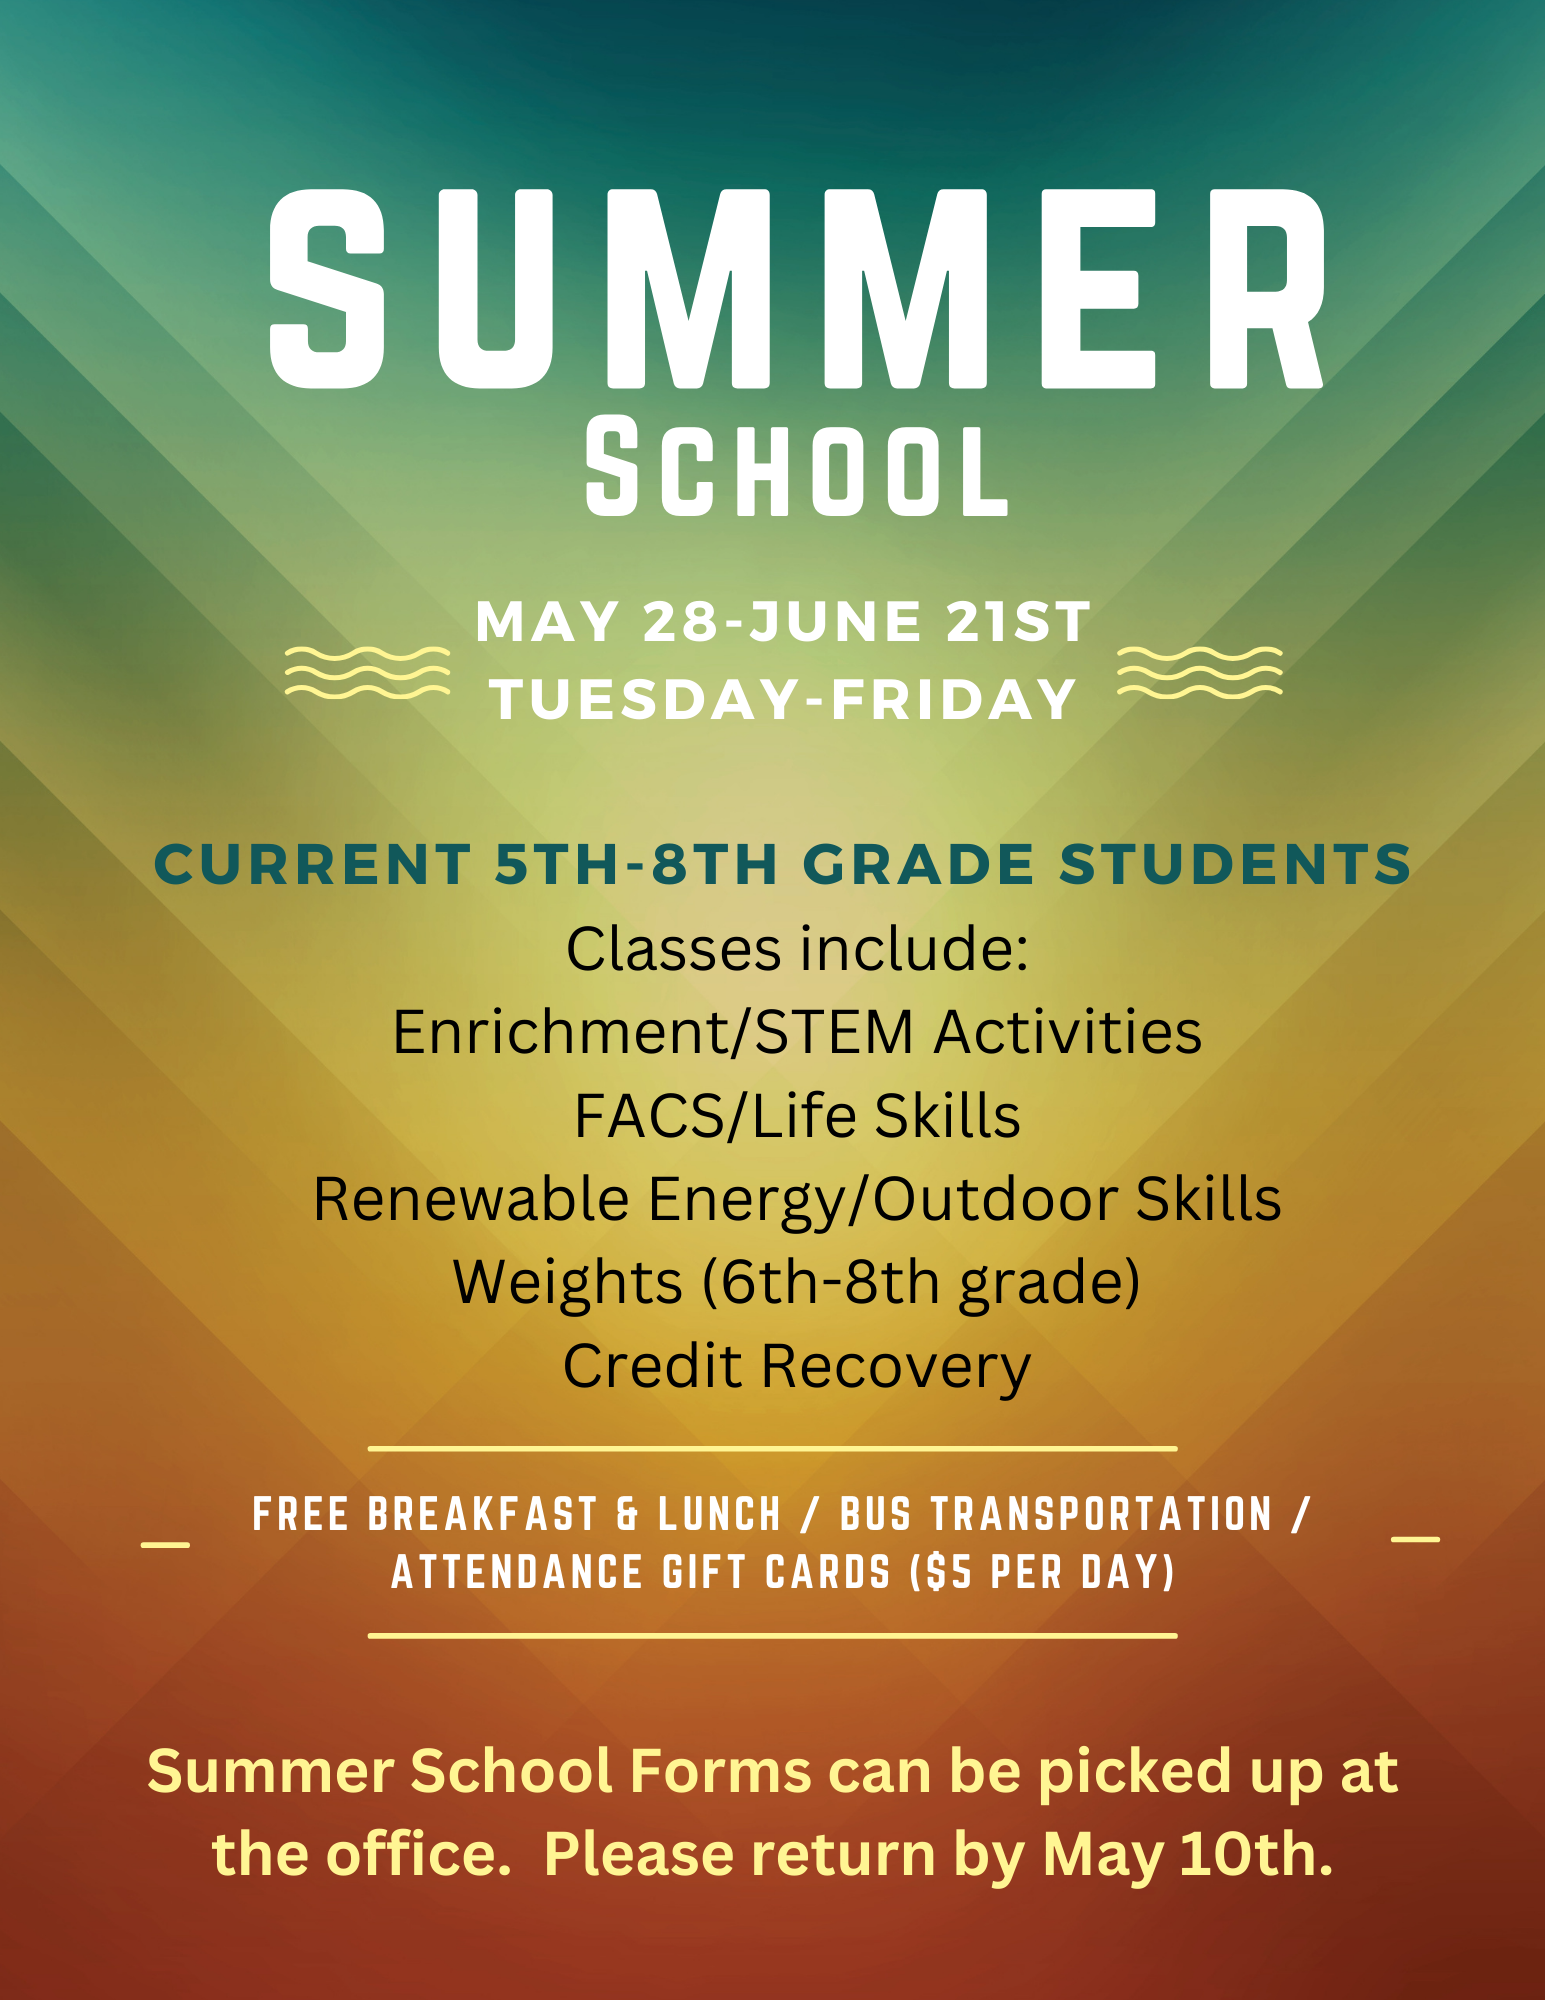 Summer School.  May 28th-June 21st.  Current 5th-8th grade students.  Classes include: enrichment/STEM activities, FACS/Life Skills, Renewable Energy/Outdoor skills, weights, and credit recovery.  Free breakfast, bus transportation, attendance gift cards.  Forms can be picked up at the office.  Please return by May 10th